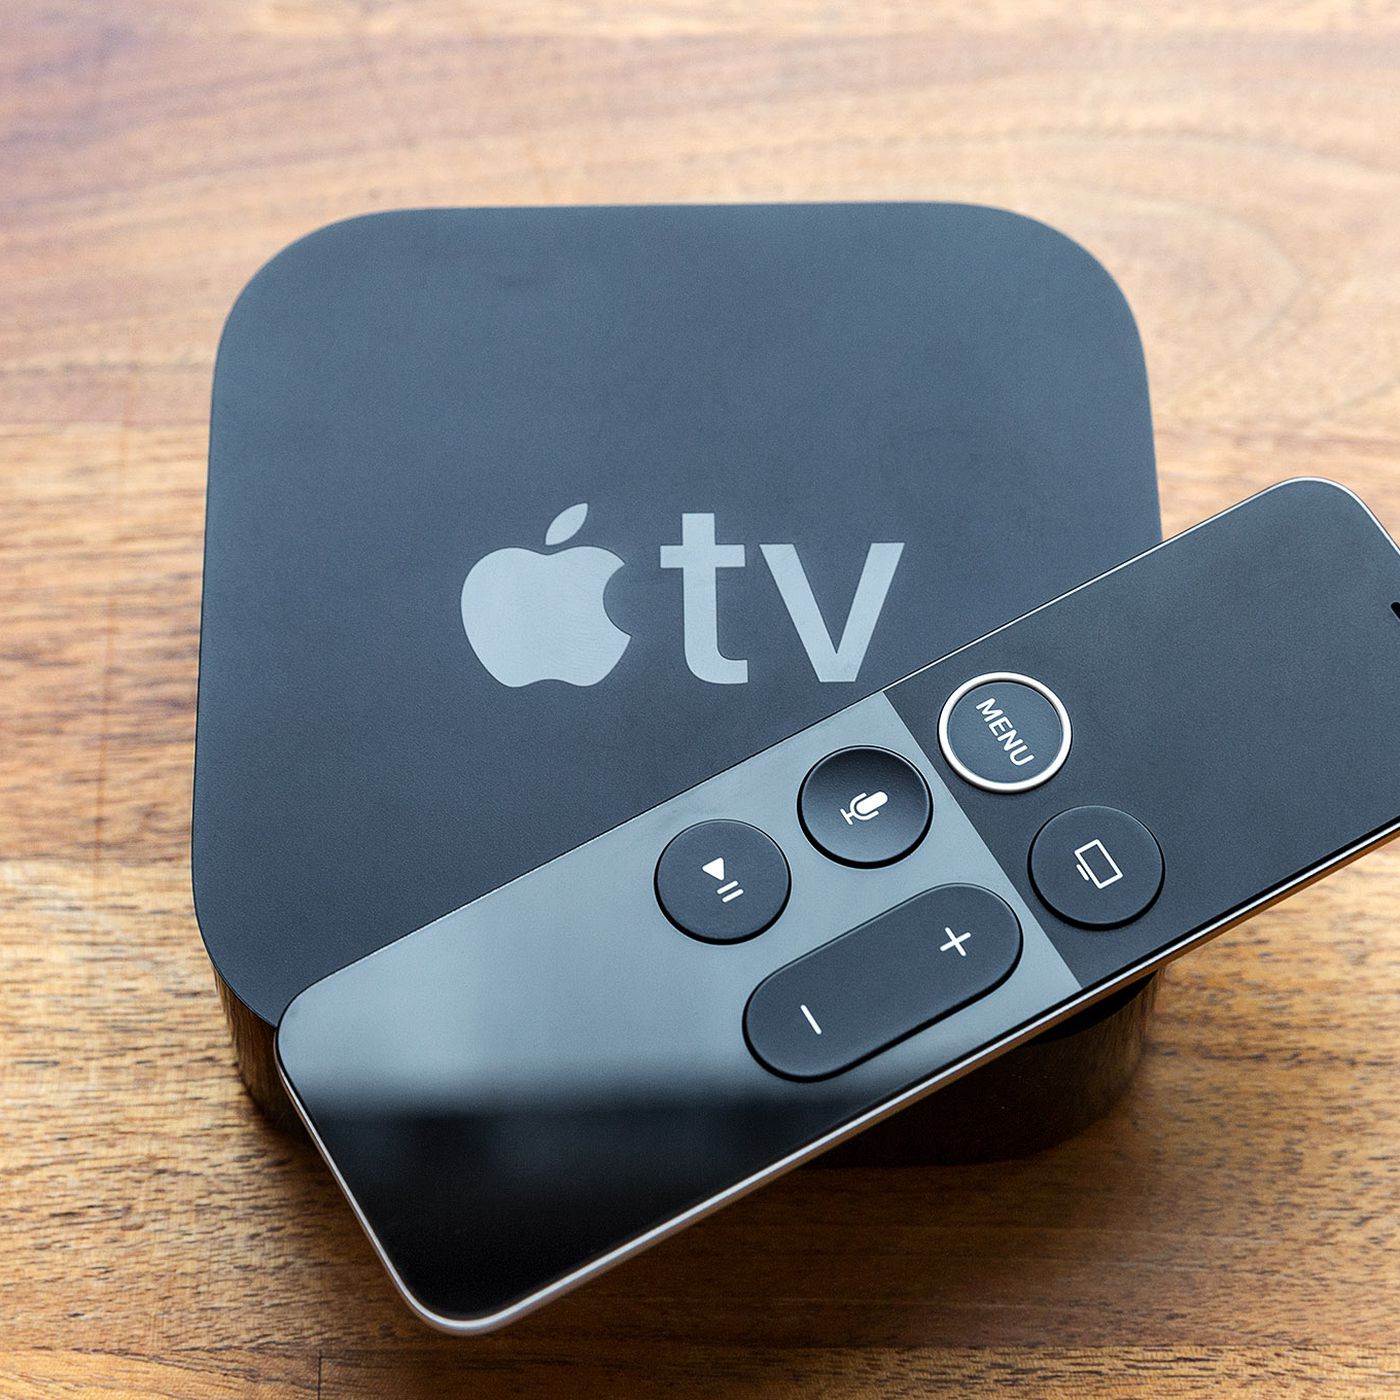 A New Apple TV Might Release Soon